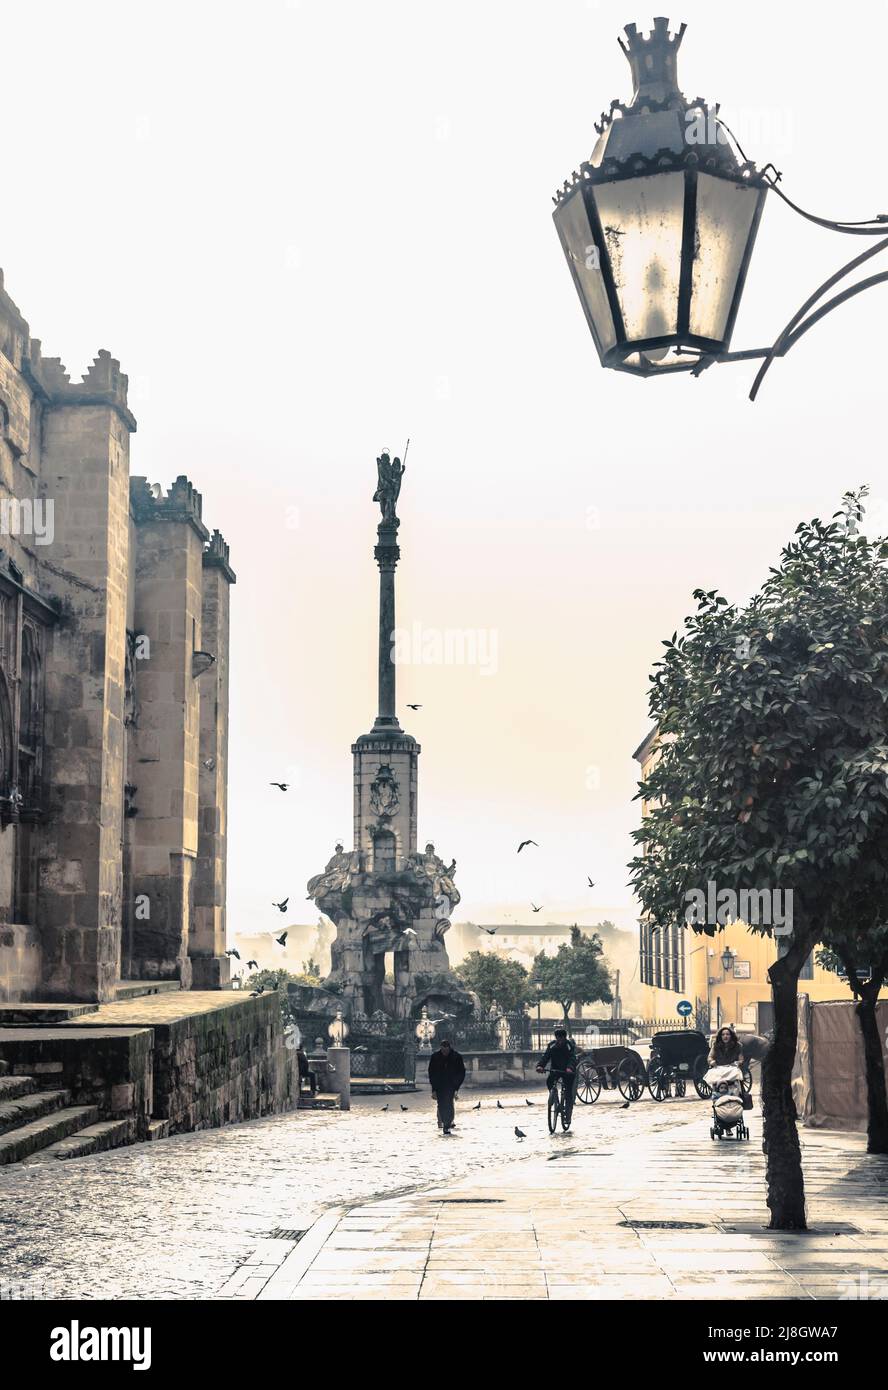 Winter's day in Cordoba, Cordoba Province, Andalusia, southern Spain.  Calle Torrijos and the column known as the Triunfo de San Rafael.  On the left Stock Photo